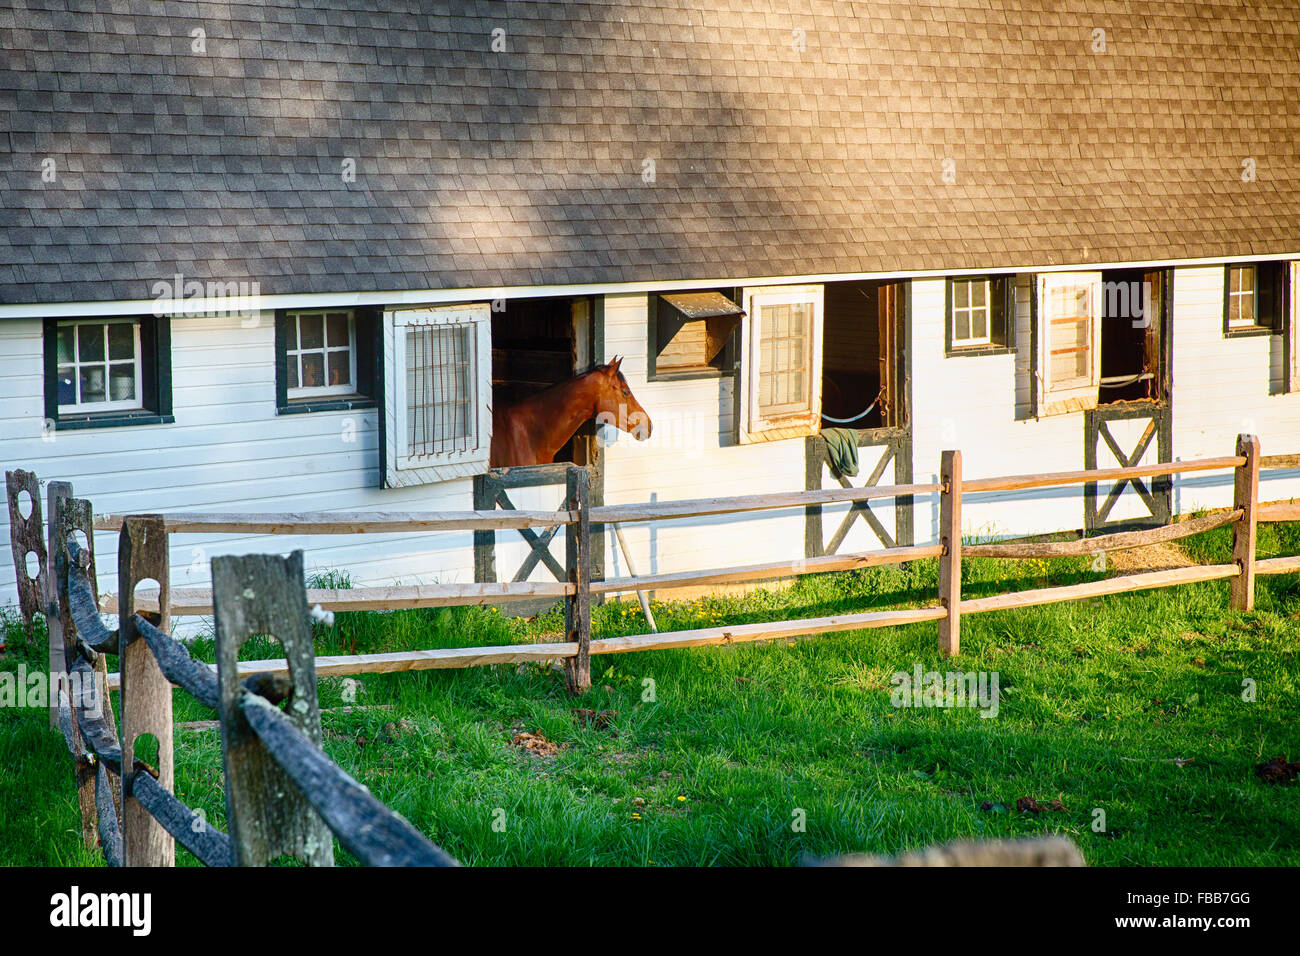 A horse Peeking Out of a Stable, Tewksbury, Hunterdon County, New Jersey Stock Photo